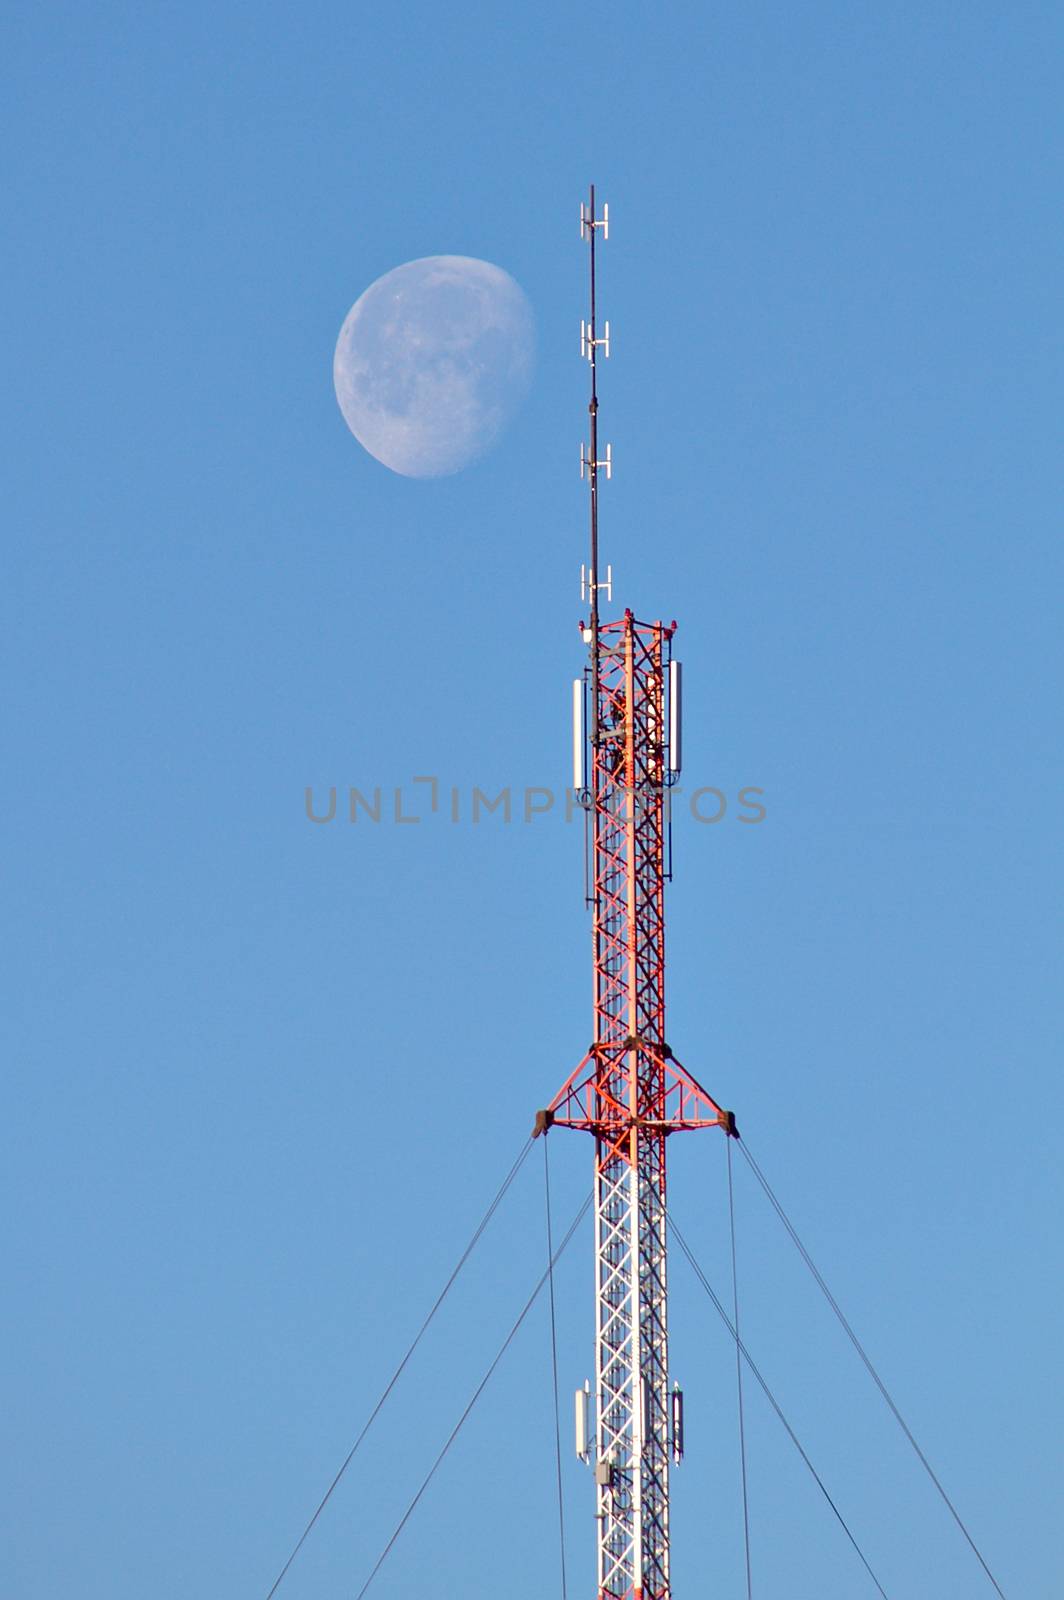 Large moon shining next to top of a telecommunication tower at daytime. Communication to the moon and space. Maybe receiving extraterrestrial signals from other civilizations.